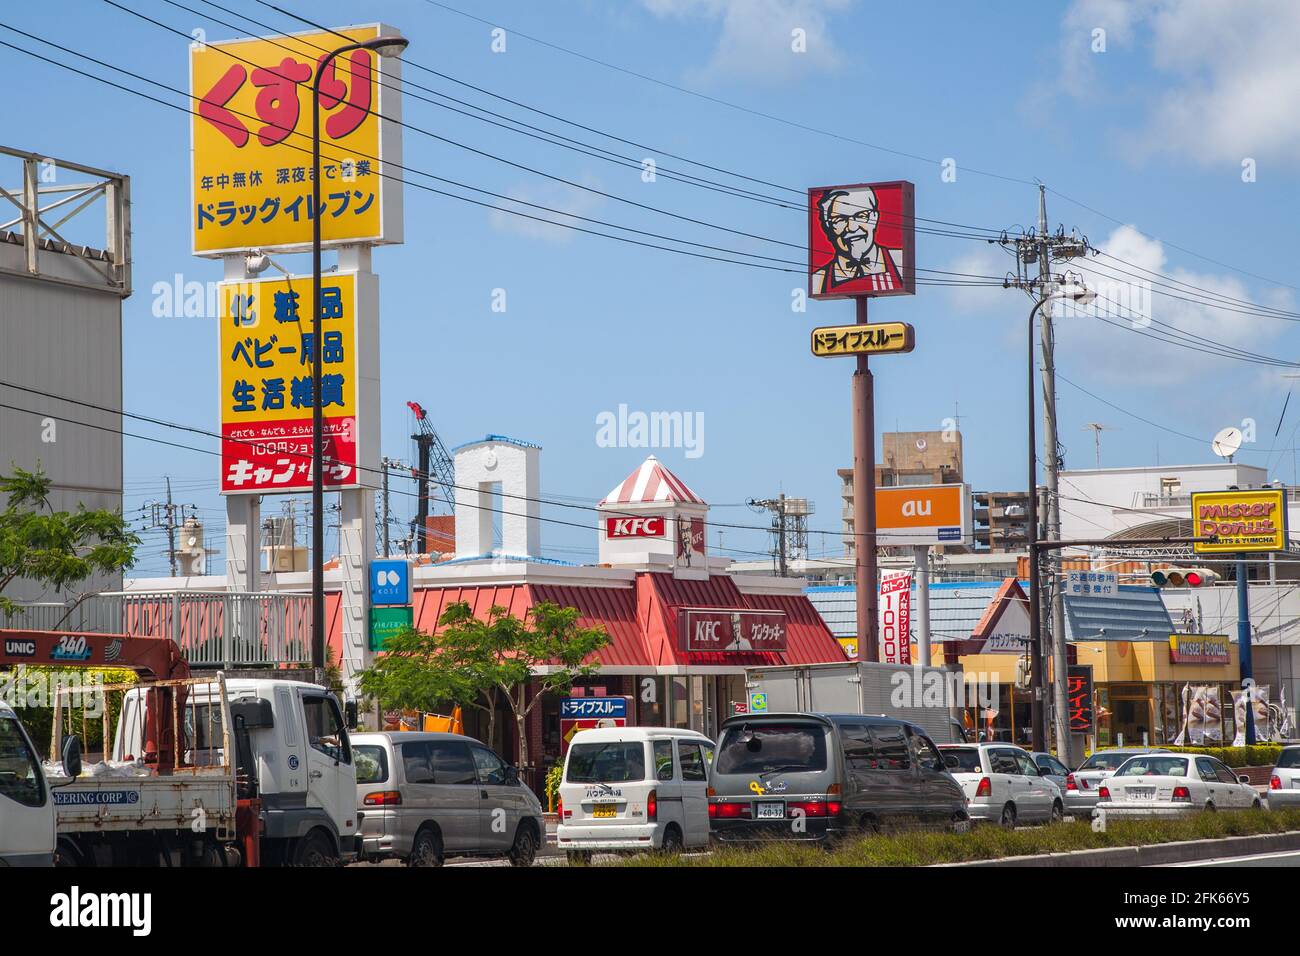 Colourful shop and restaurant signage for KFC fast food restaurant in Naha, Okinawa, Japan Stock Photo